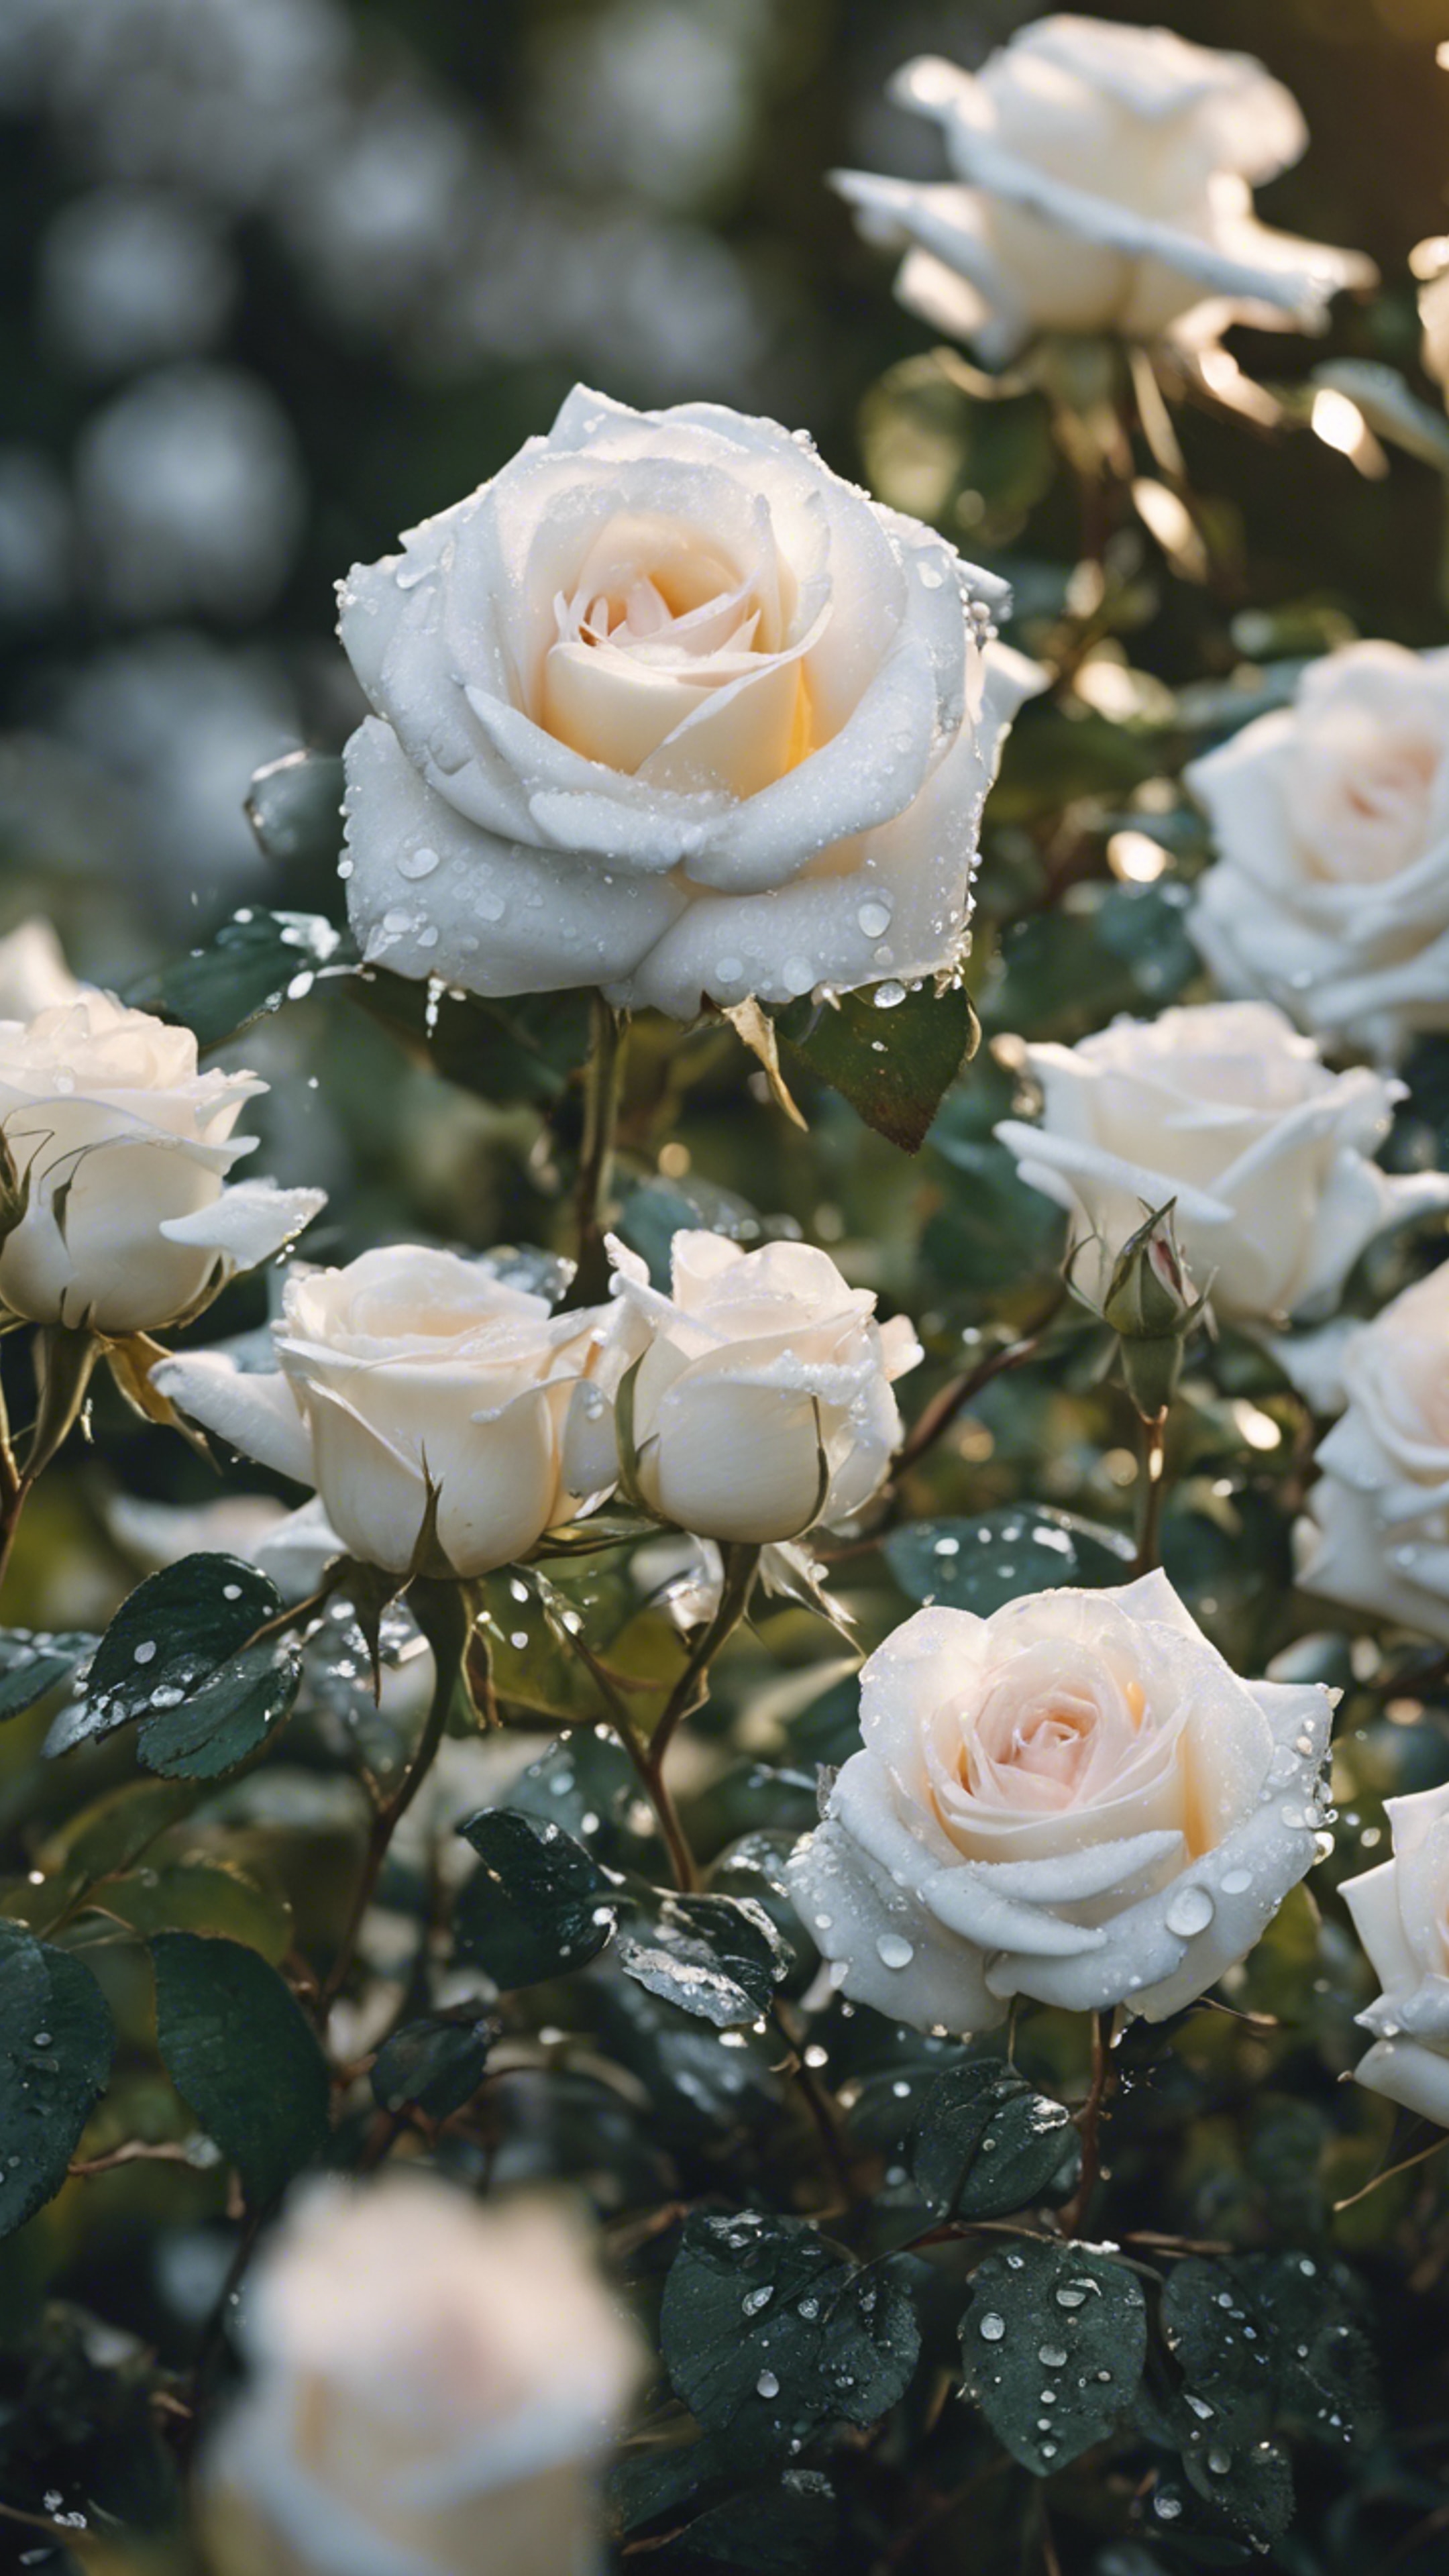 White roses covered in silver morning dew in a lush rose garden. Тапет[67c2c5bc62874412a2b6]